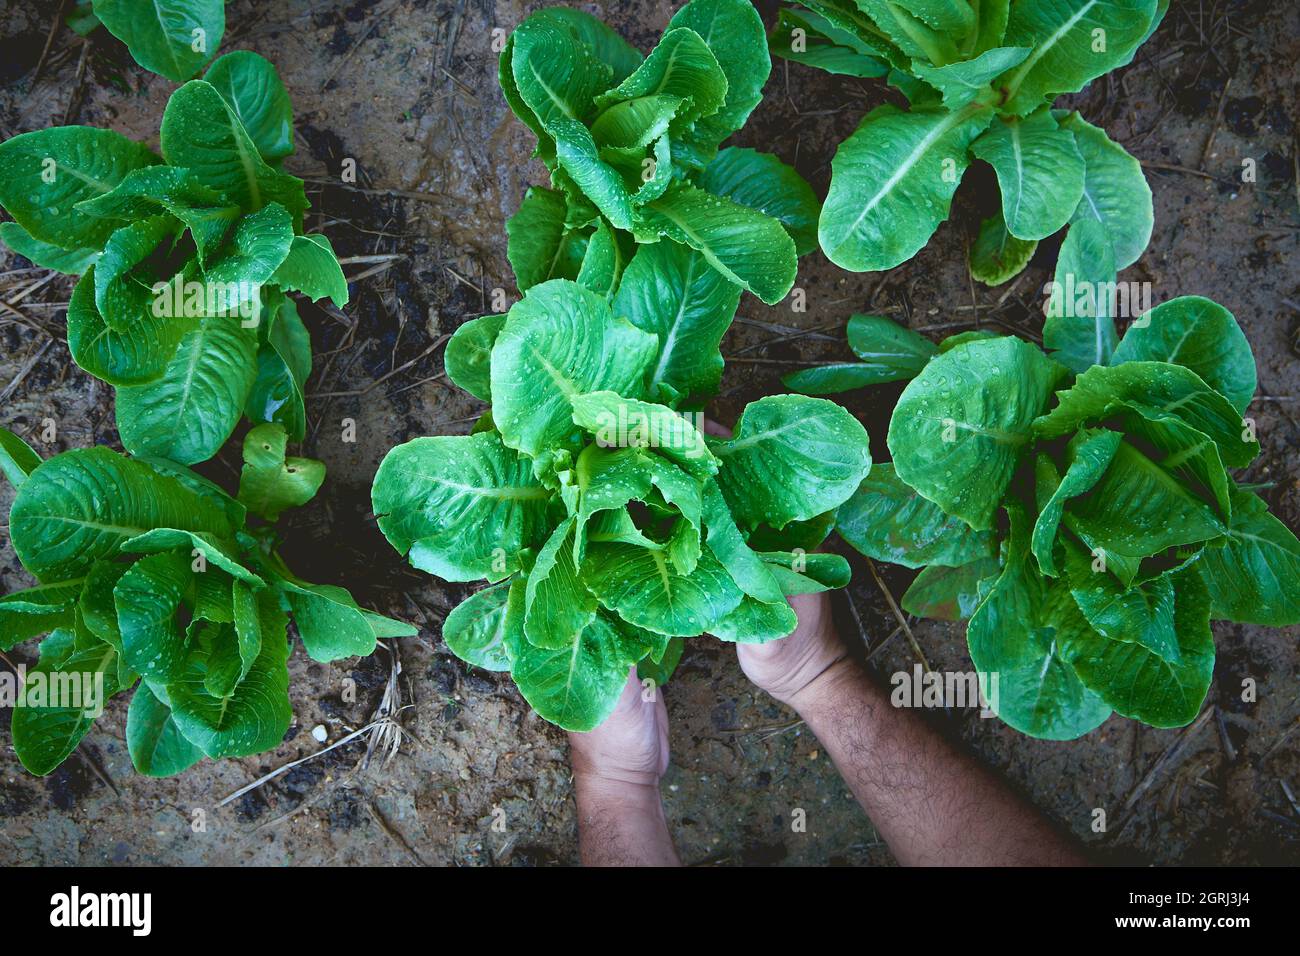 Cropped Image Of Hands Harvesting Lettuce At Farm Stock Photo